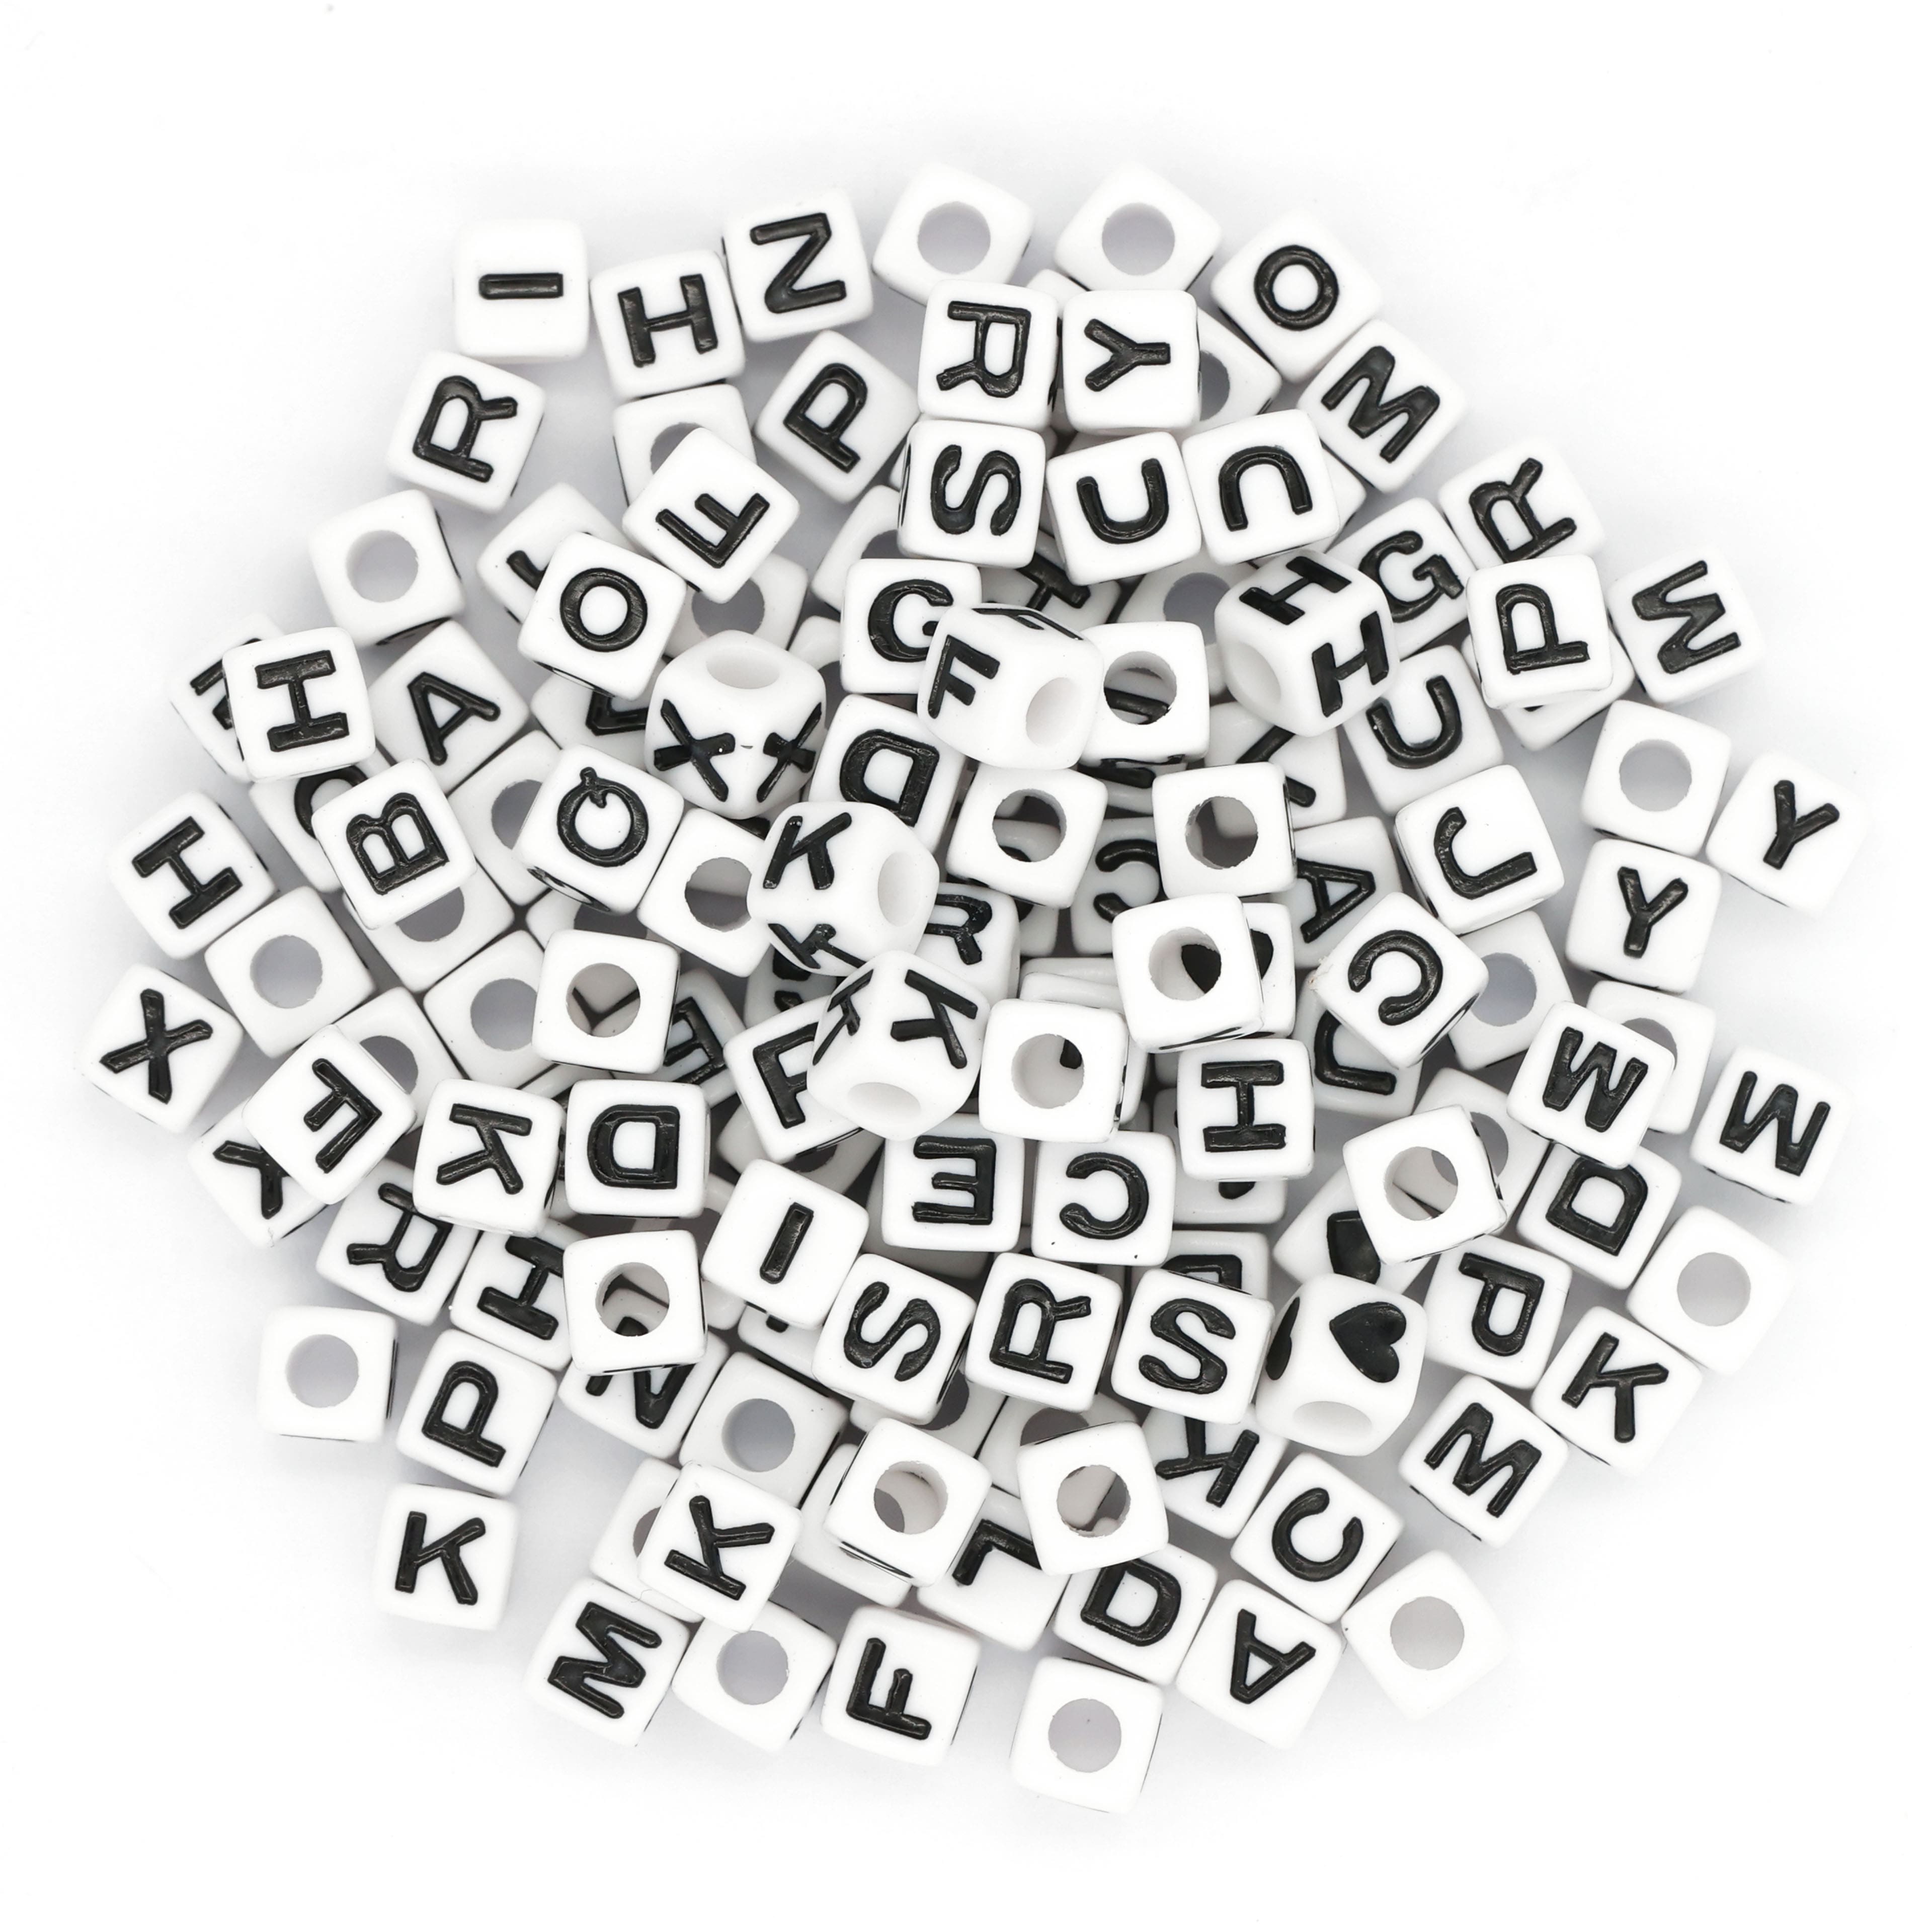 Multicolor Alphabet Beads by Creatology™, 6.5mm